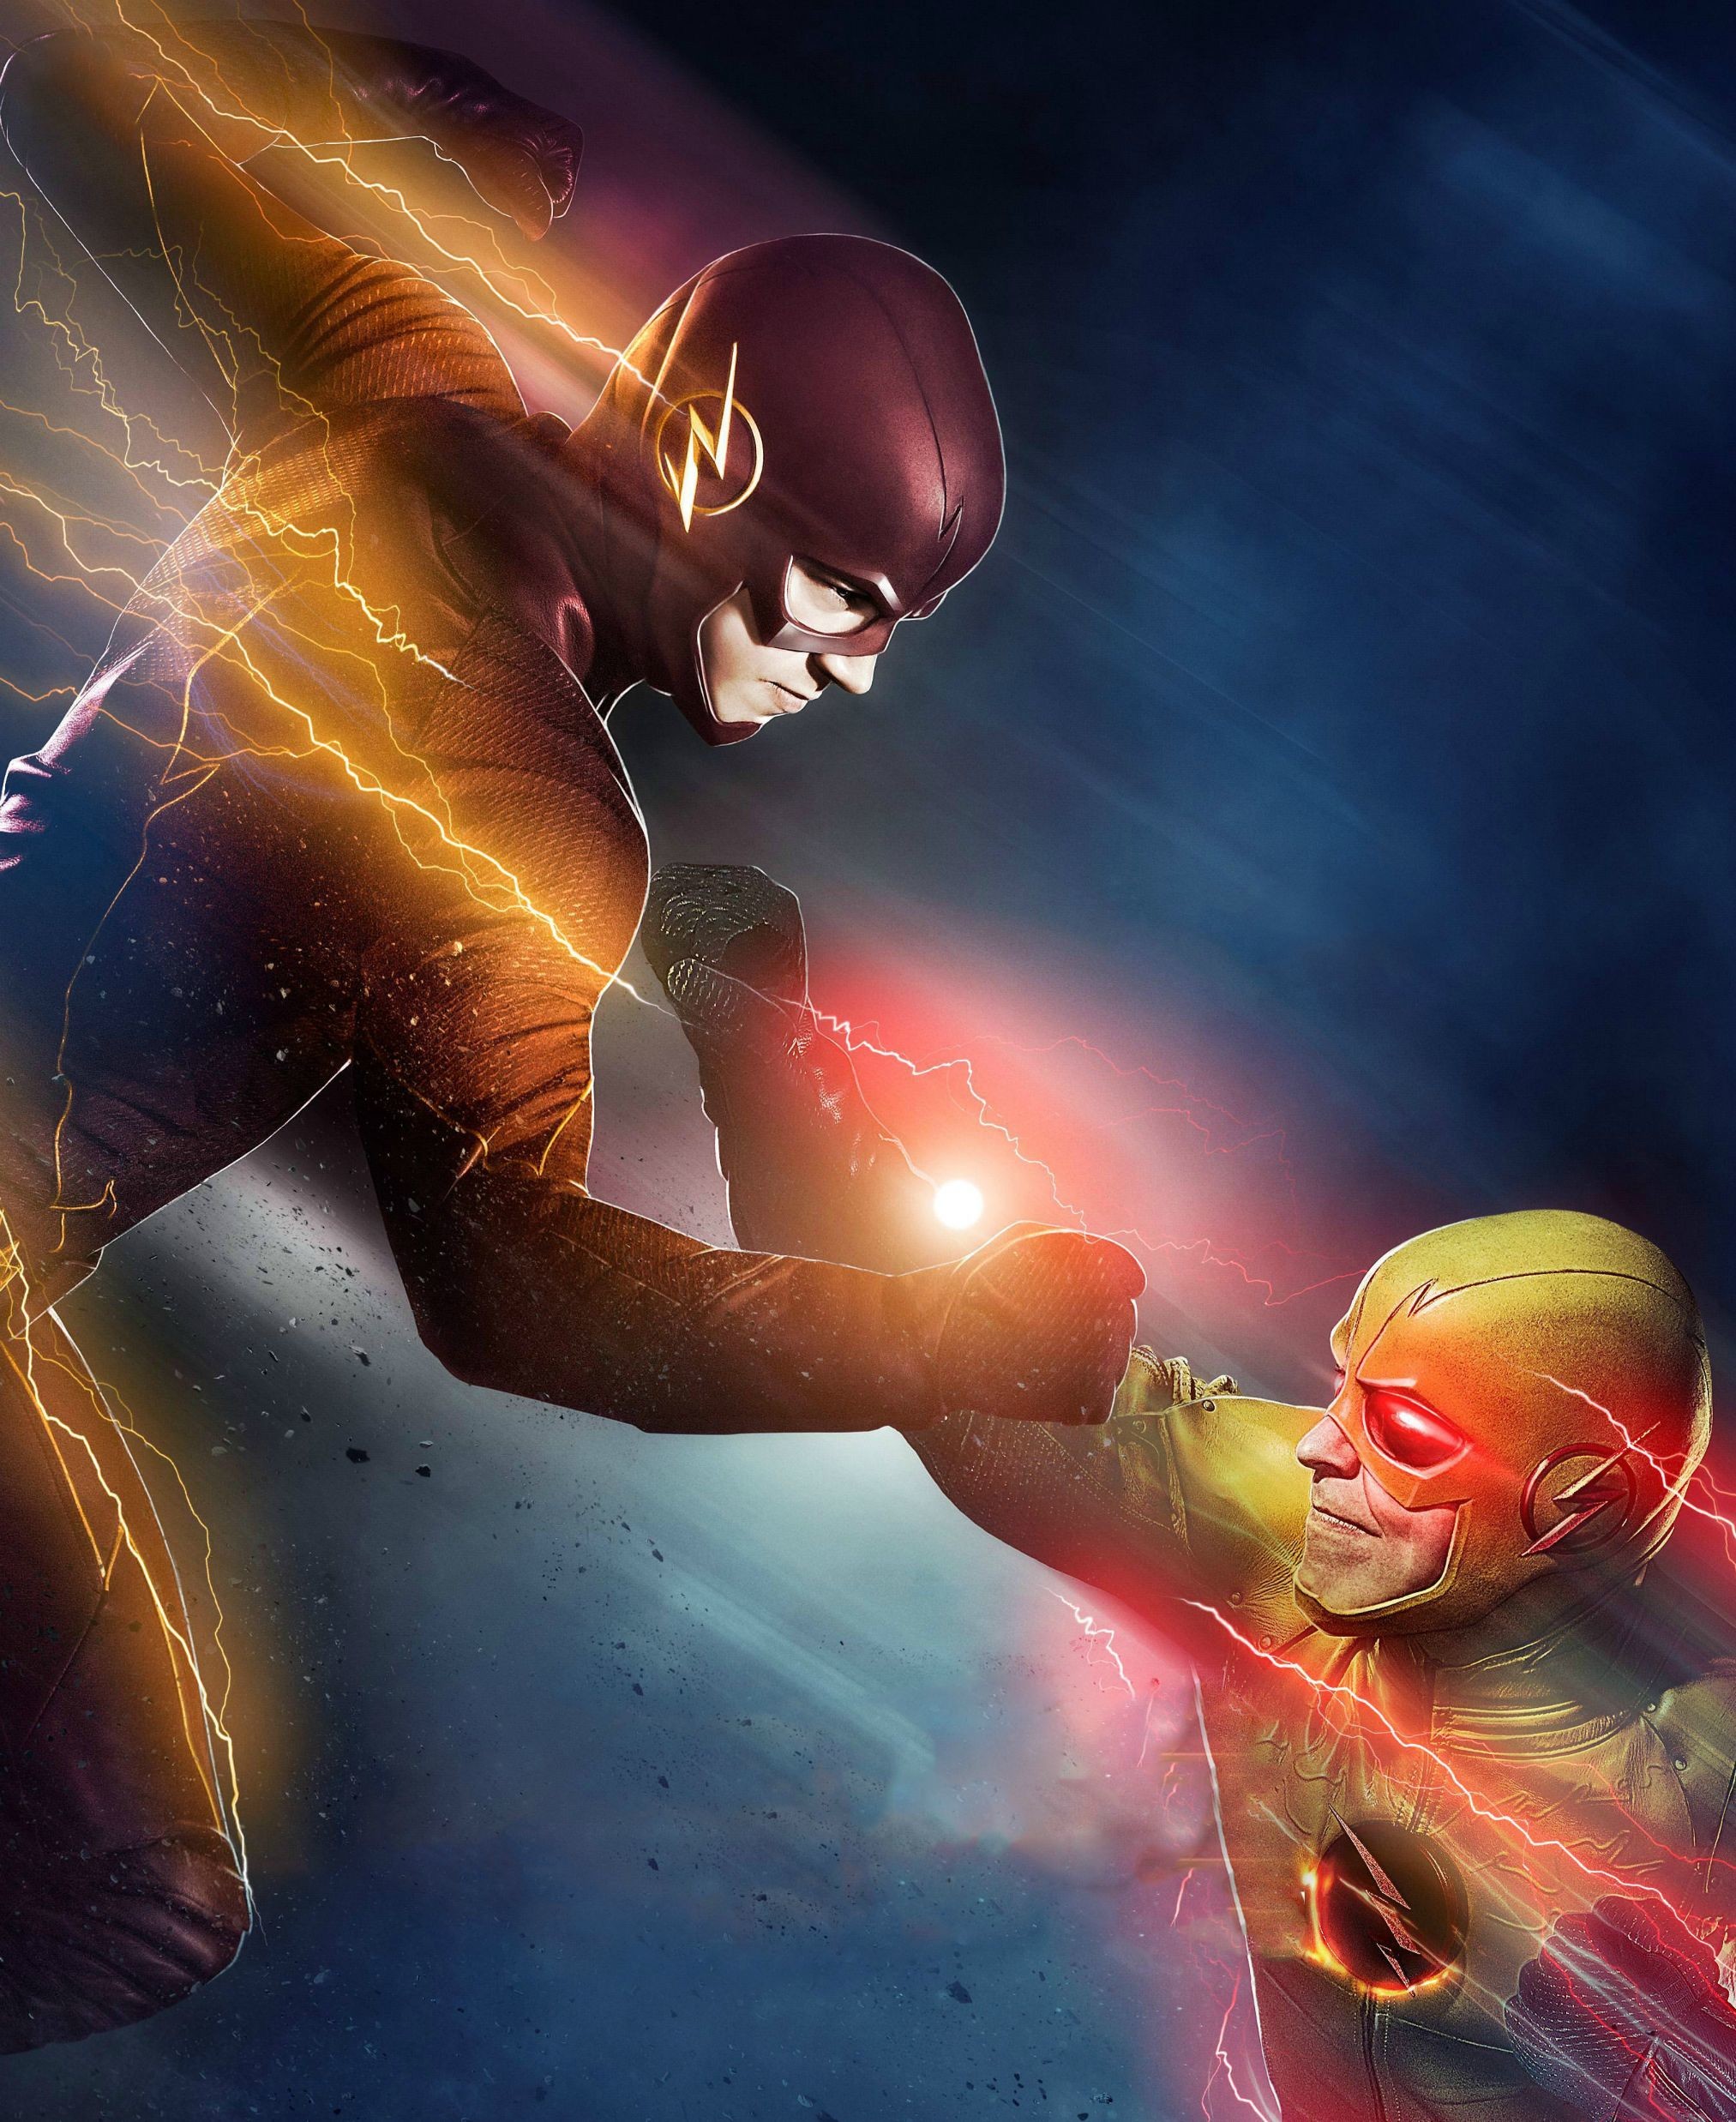 The Flash Iphone Wallpaper 72 Images